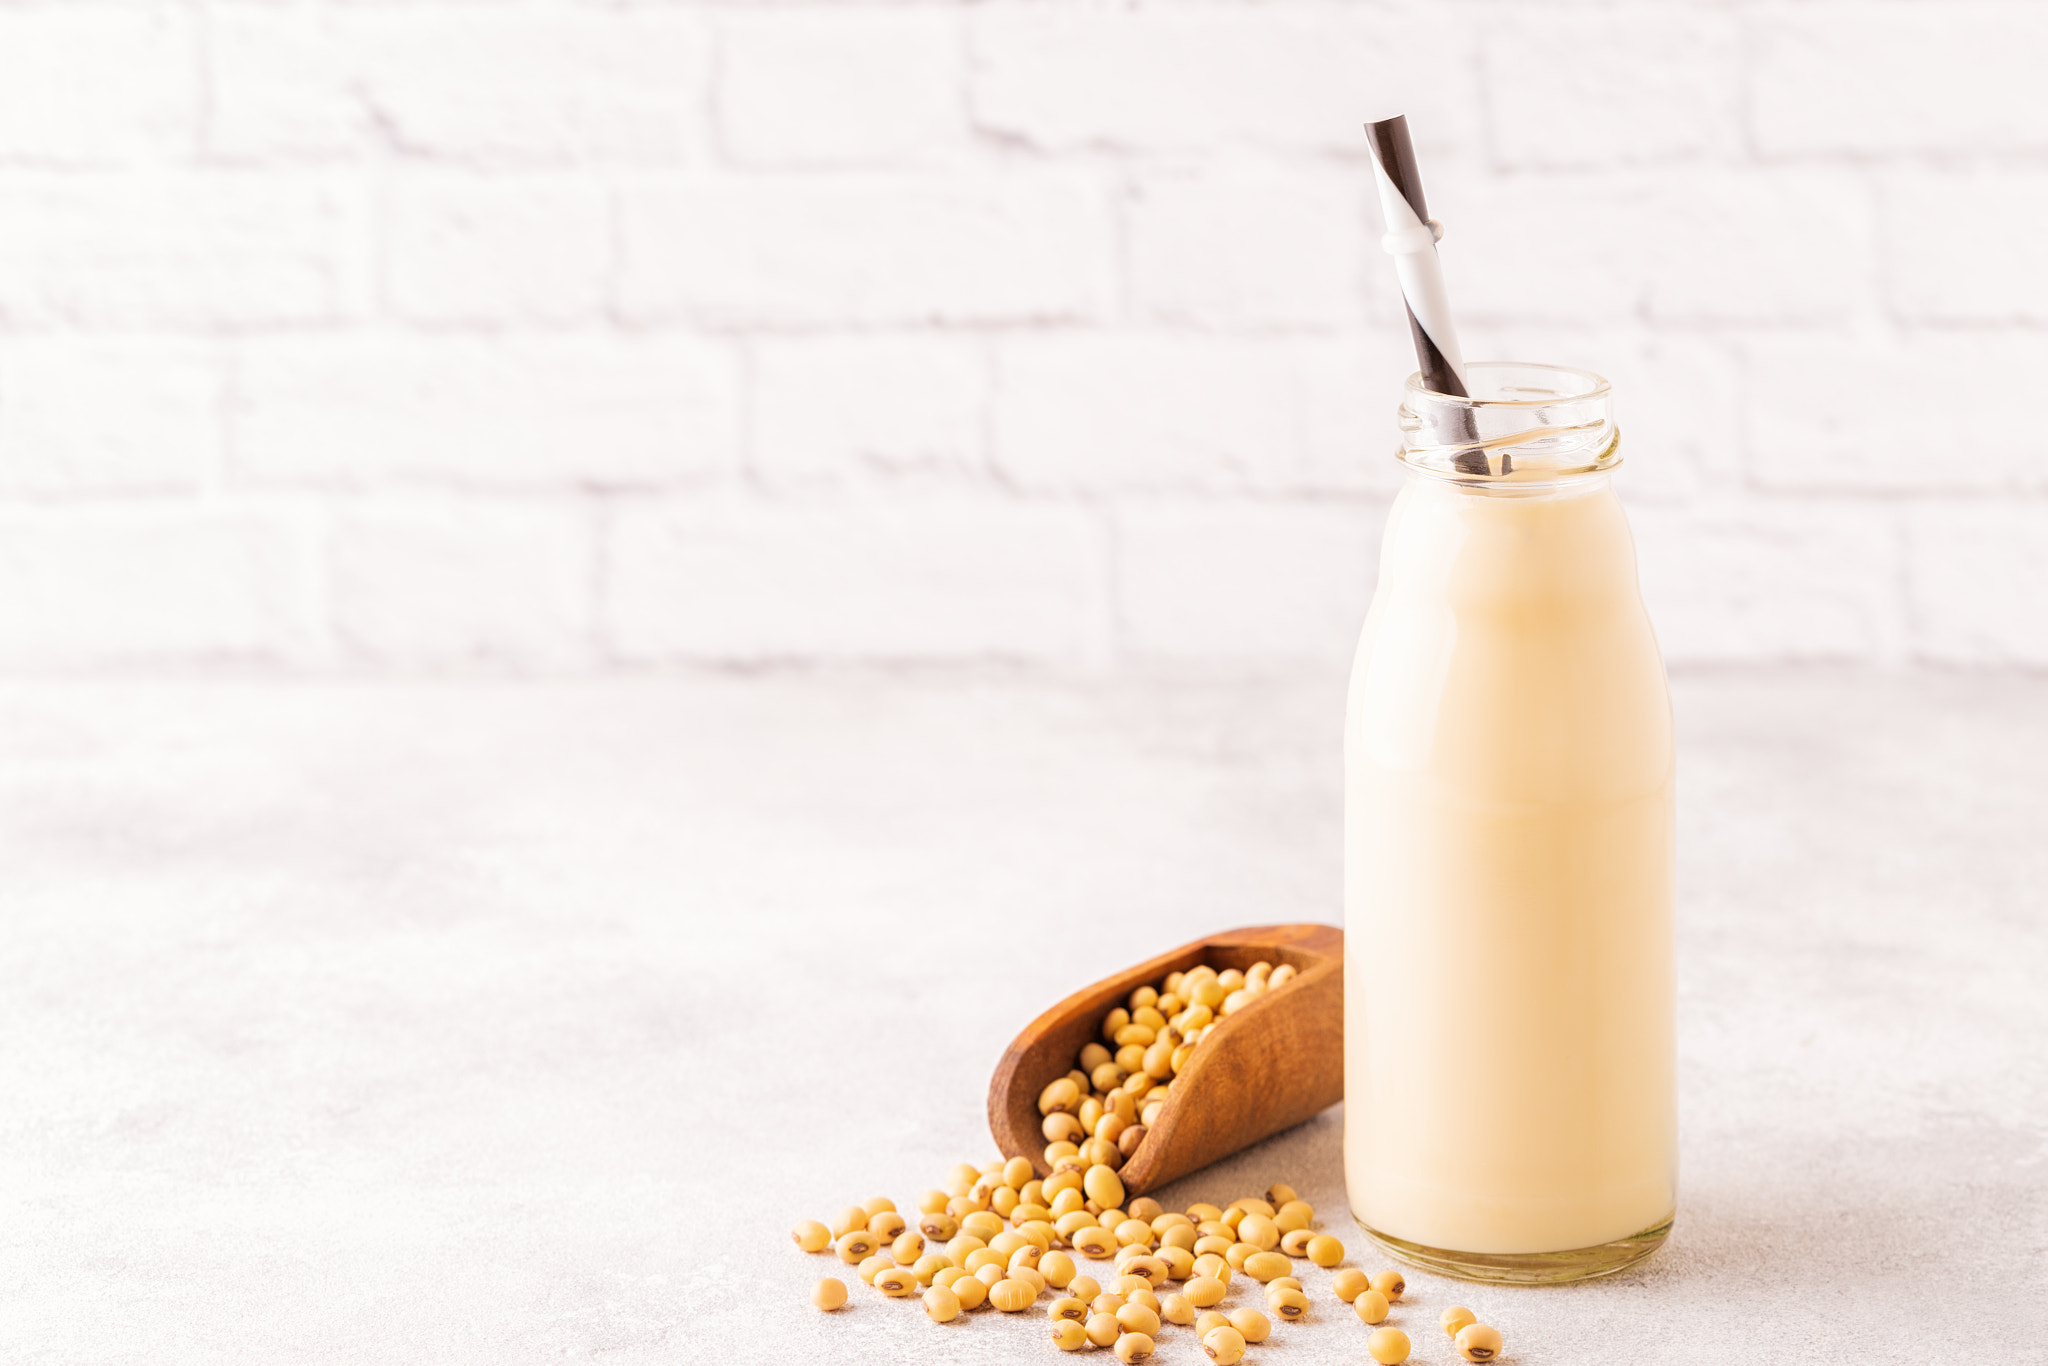 A bottle of soy milk and soy beans